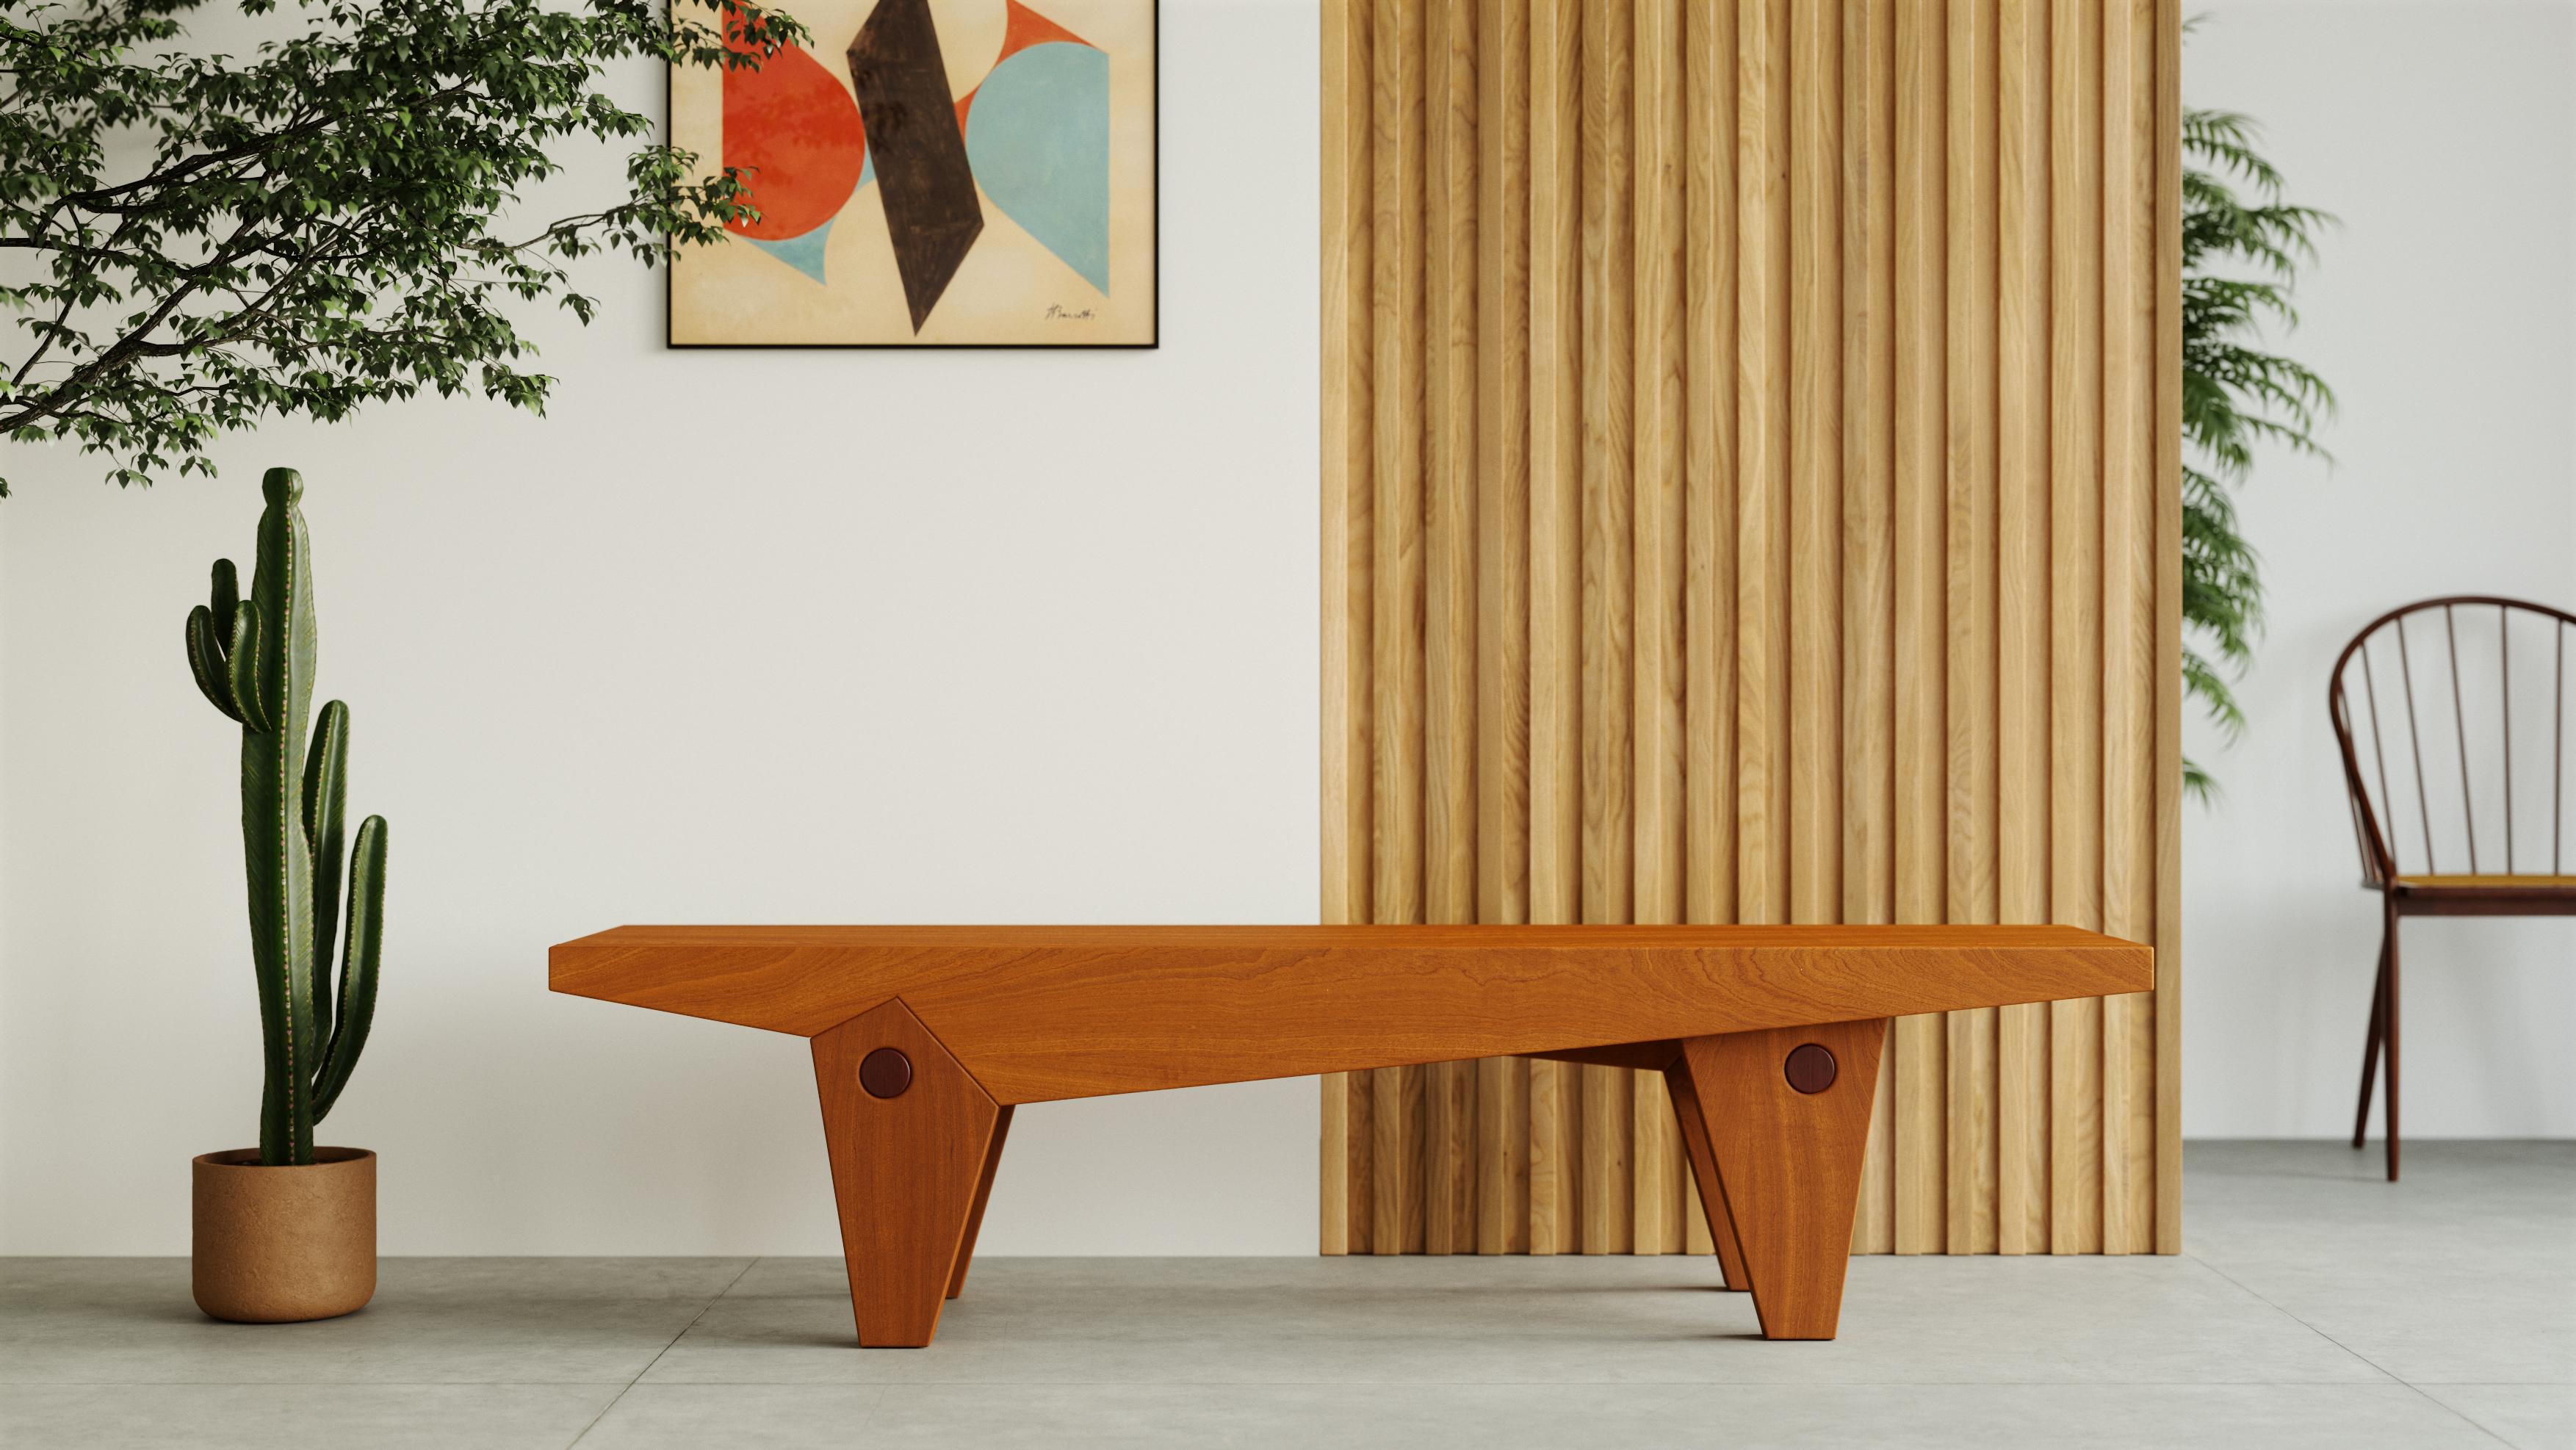 

Inspired by an architectural reference, this bench pays homage to the design of the Santa Paula Yacht Club by the São Paulo architect Vilanova Artigas. Following this logic, asymmetrical pillars (legs) support longitudinal beams (the structure of